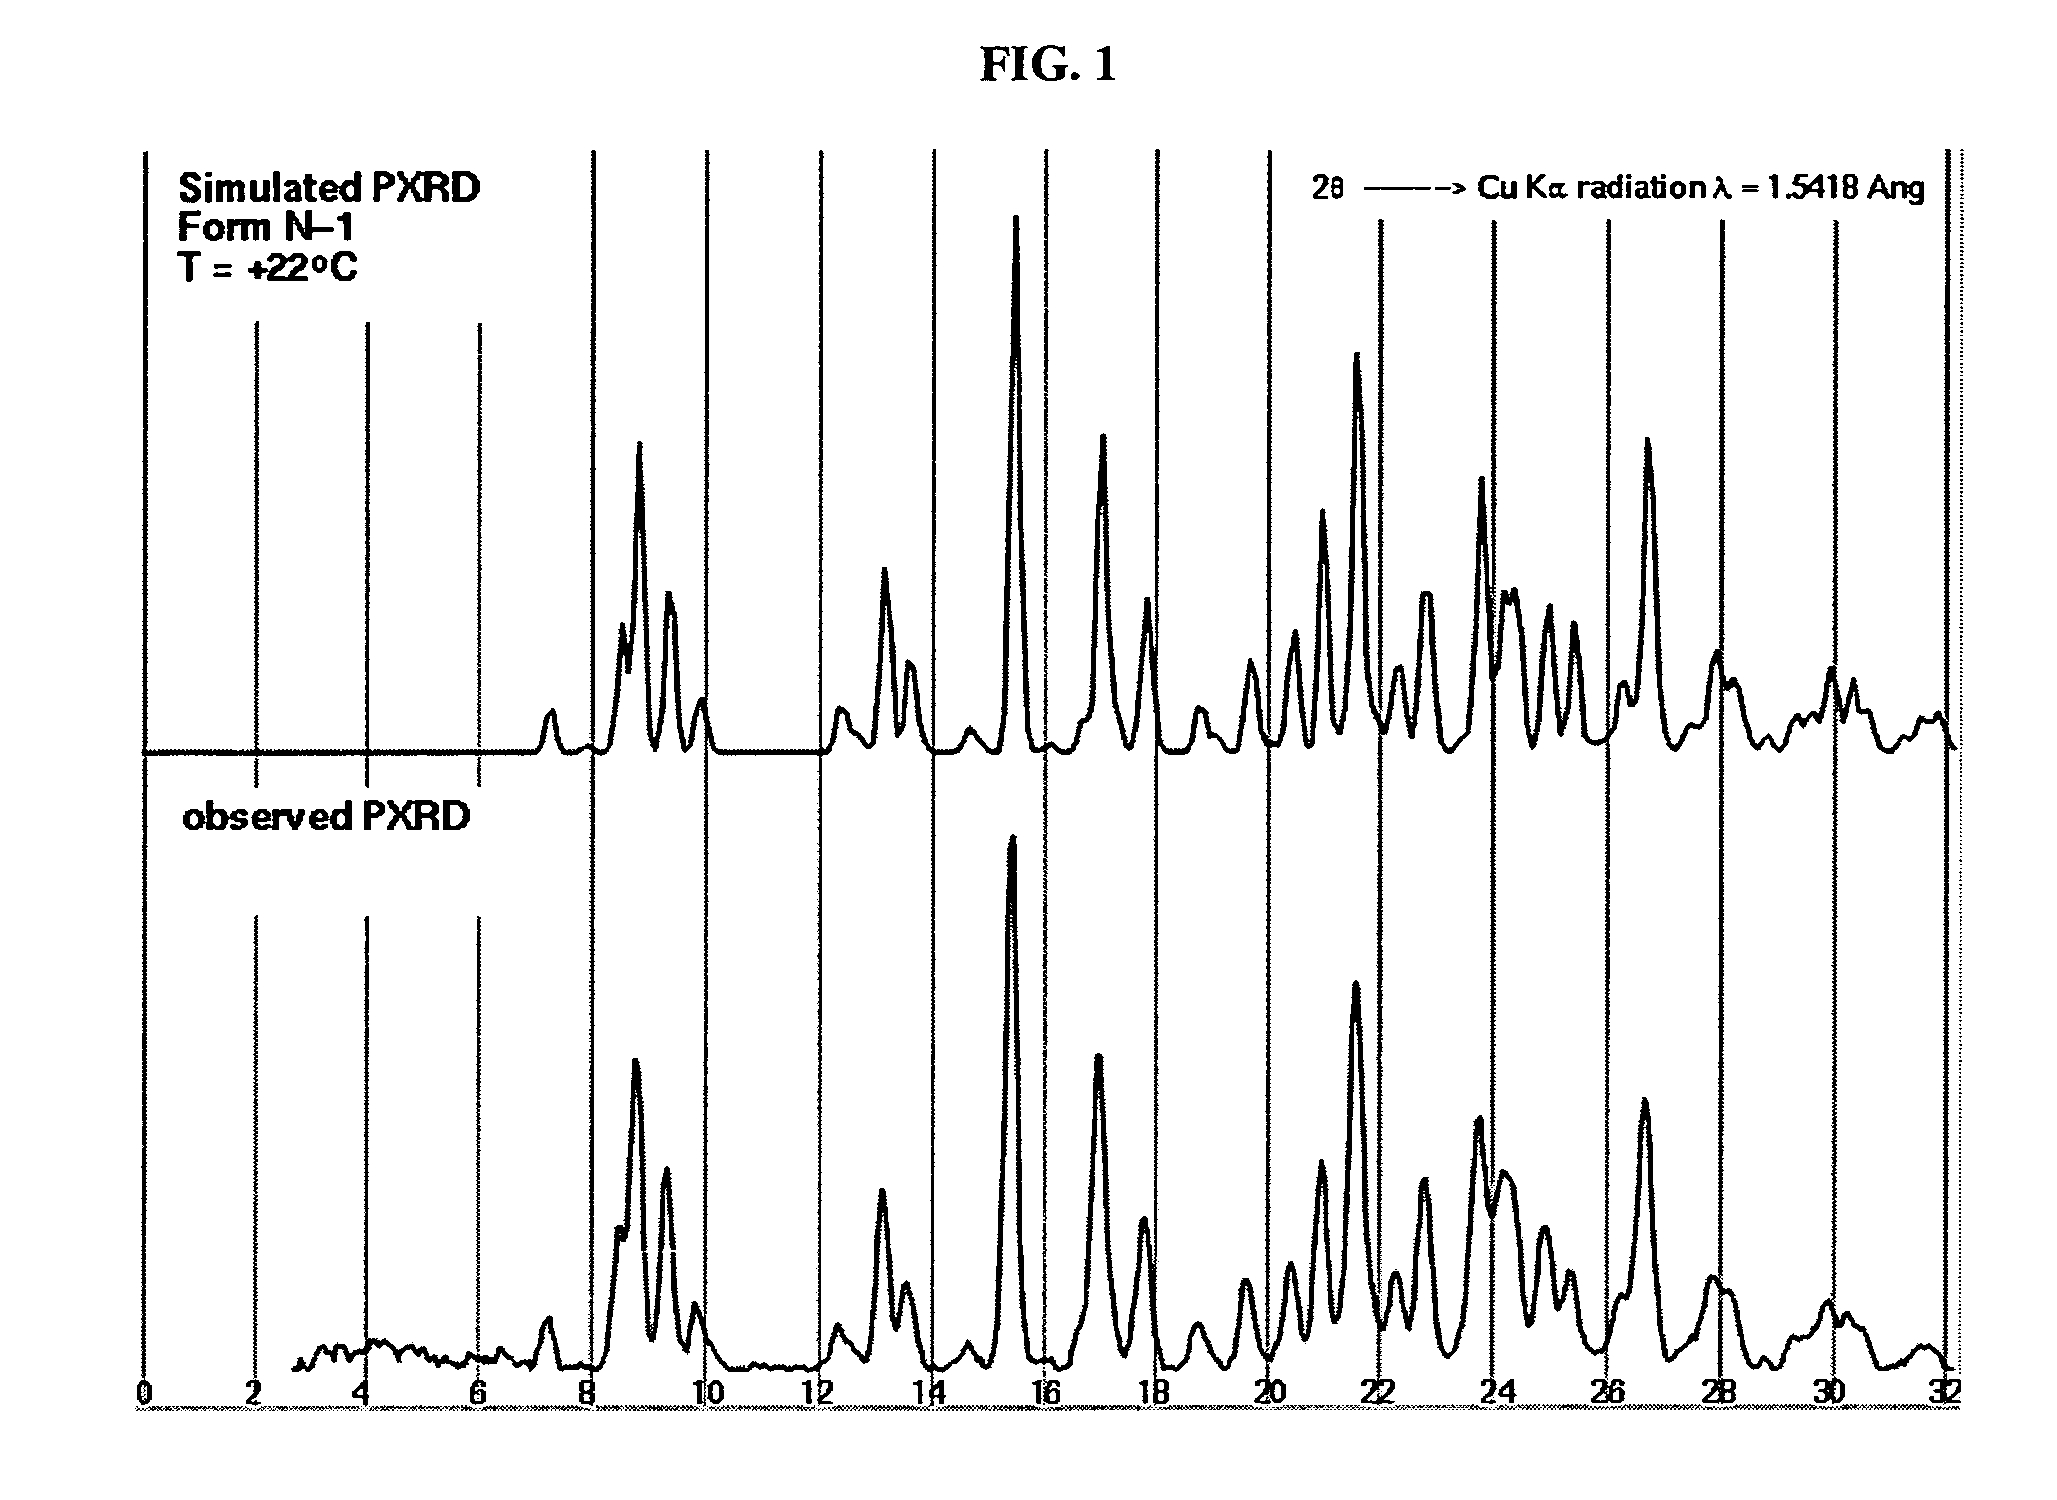 Crystalline forms and process for preparing spiro-hydantoin compounds